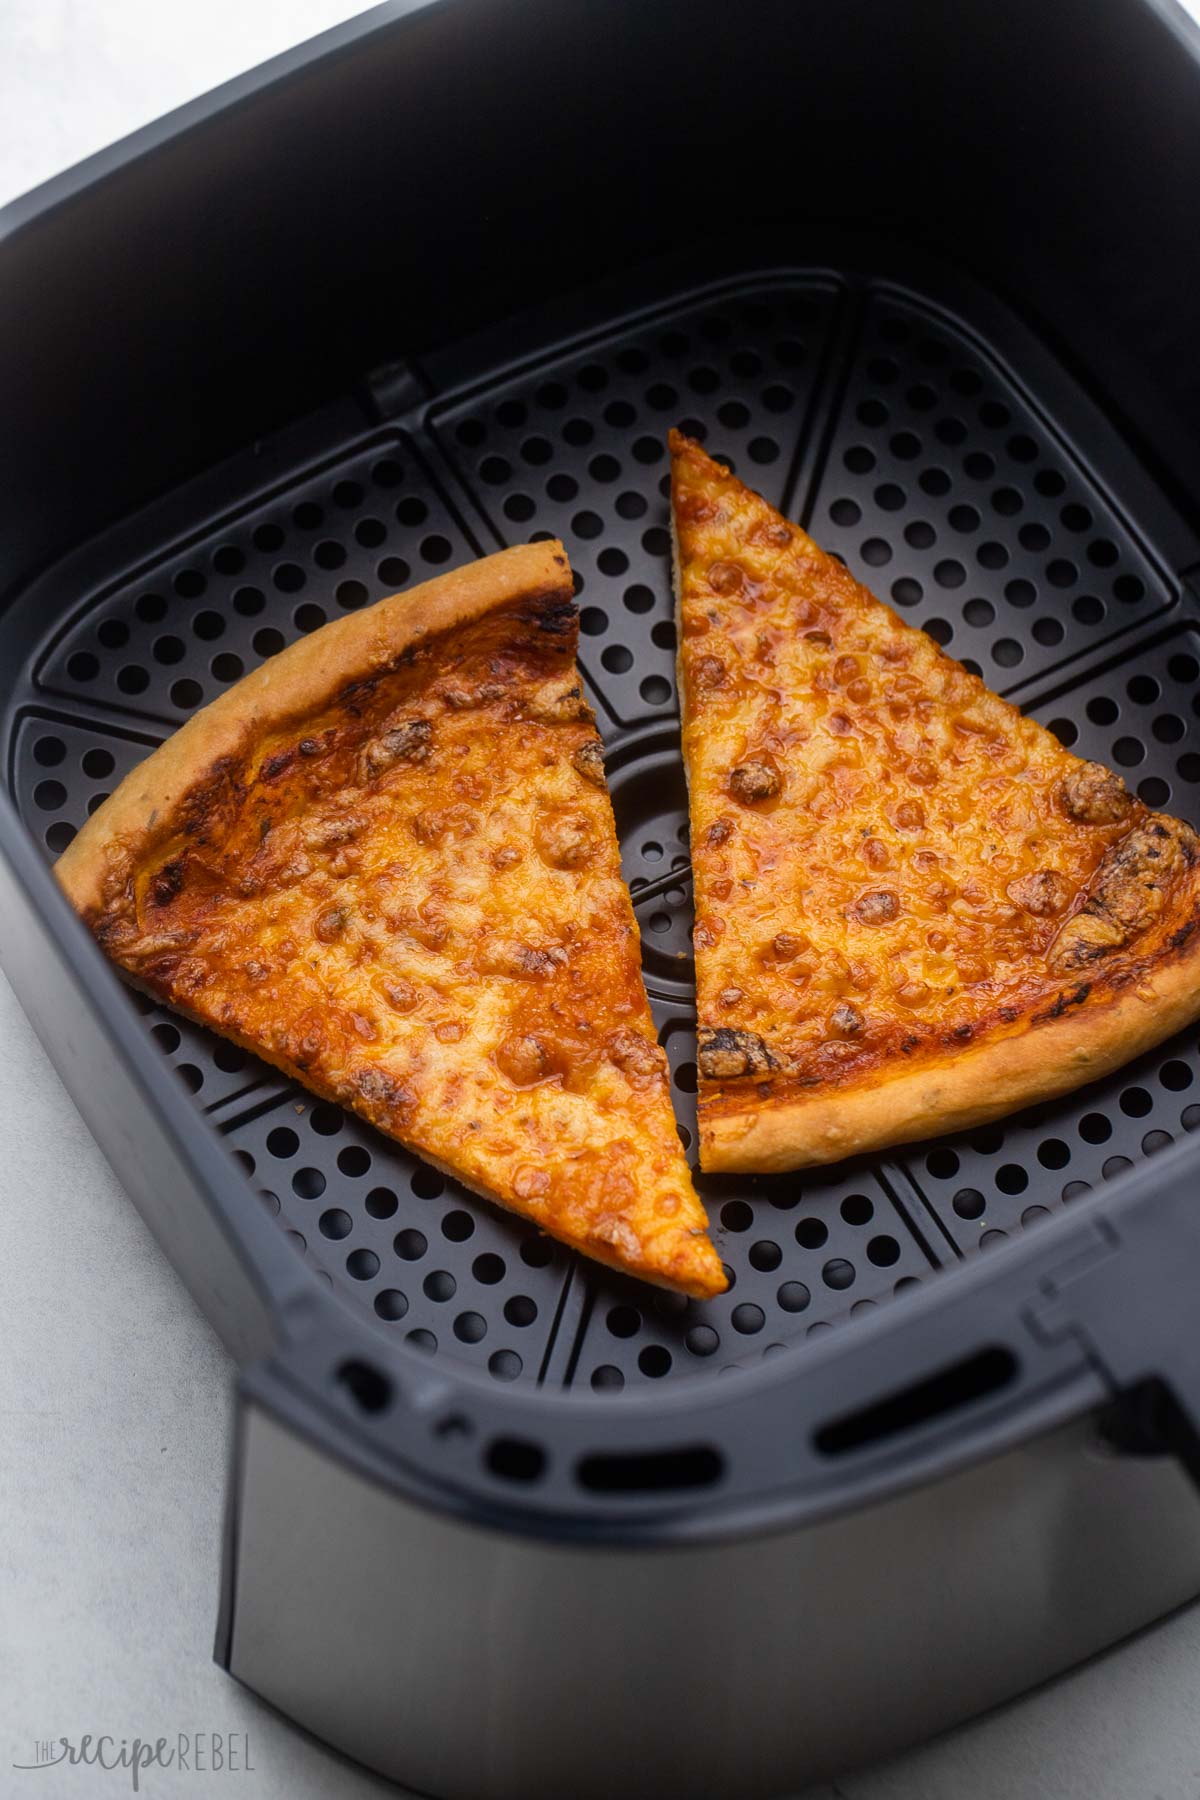 two slices of cheese pizza in air fryer basket on grey surface.